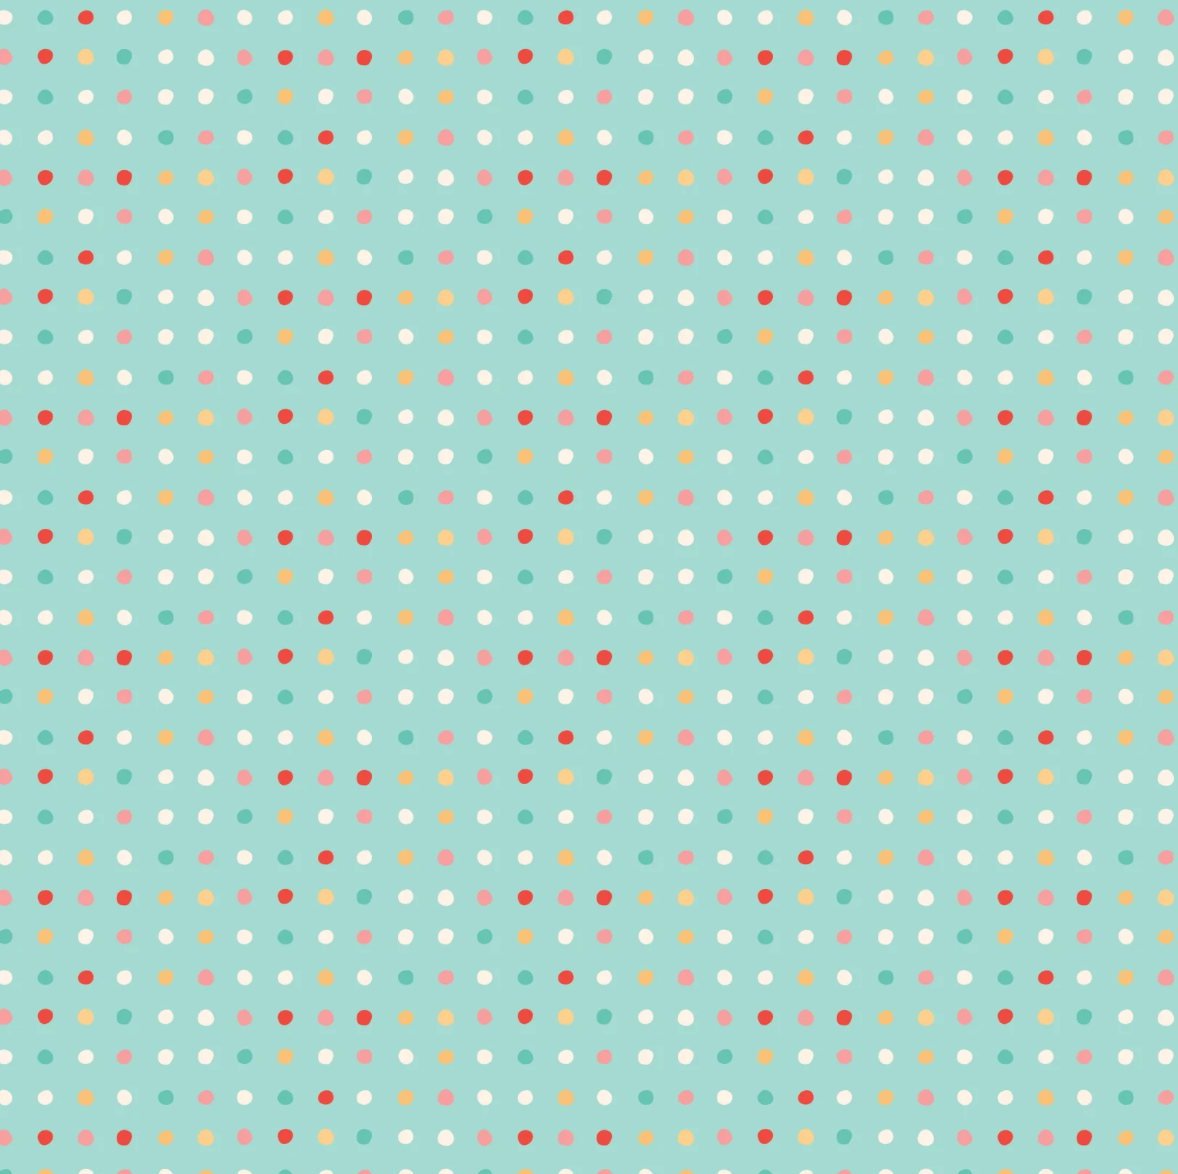 Mushroom Blooms by Poppie Cotton : Polkie Dots Teal (Estimated Ship Date Aug. 2024)